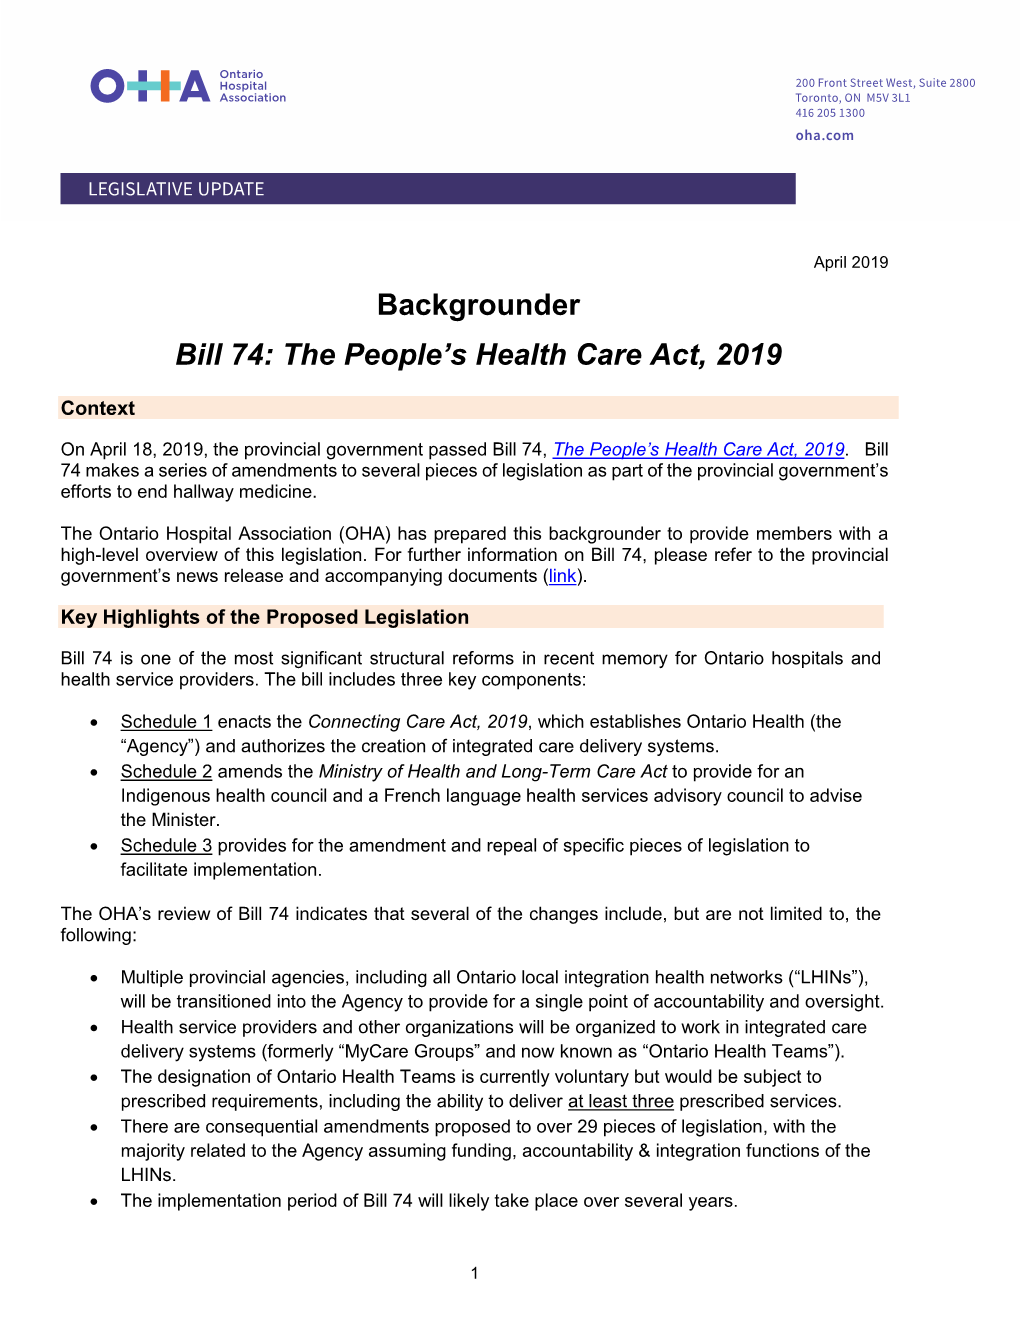 Backgrounder Bill 74: the People's Health Care Act, 2019